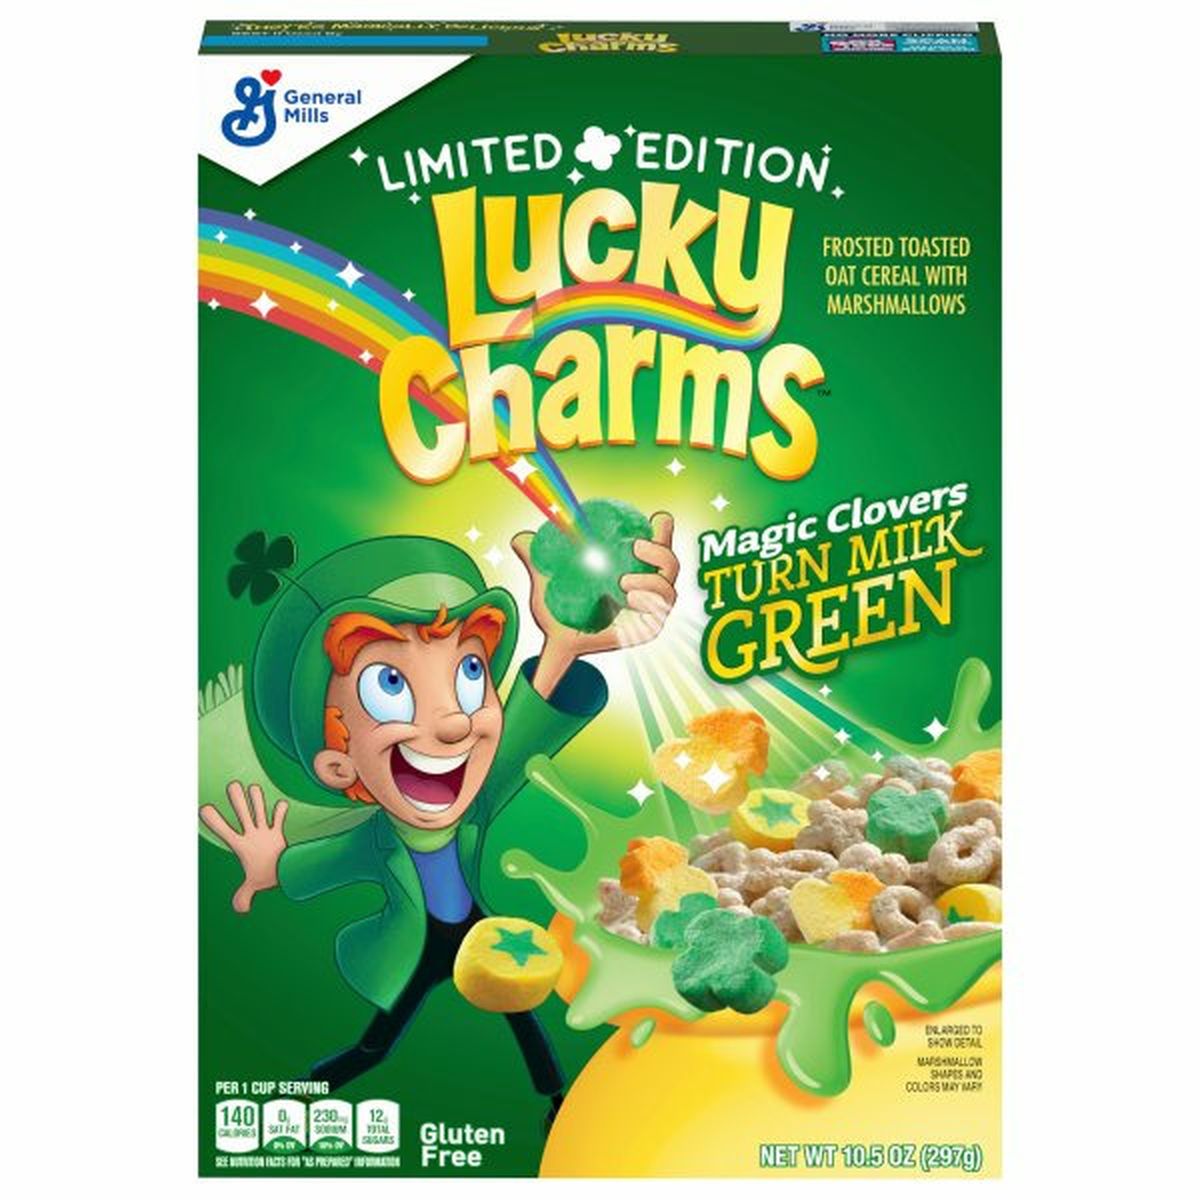 Calories in Lucky Charms Cereal, Magic Clovers